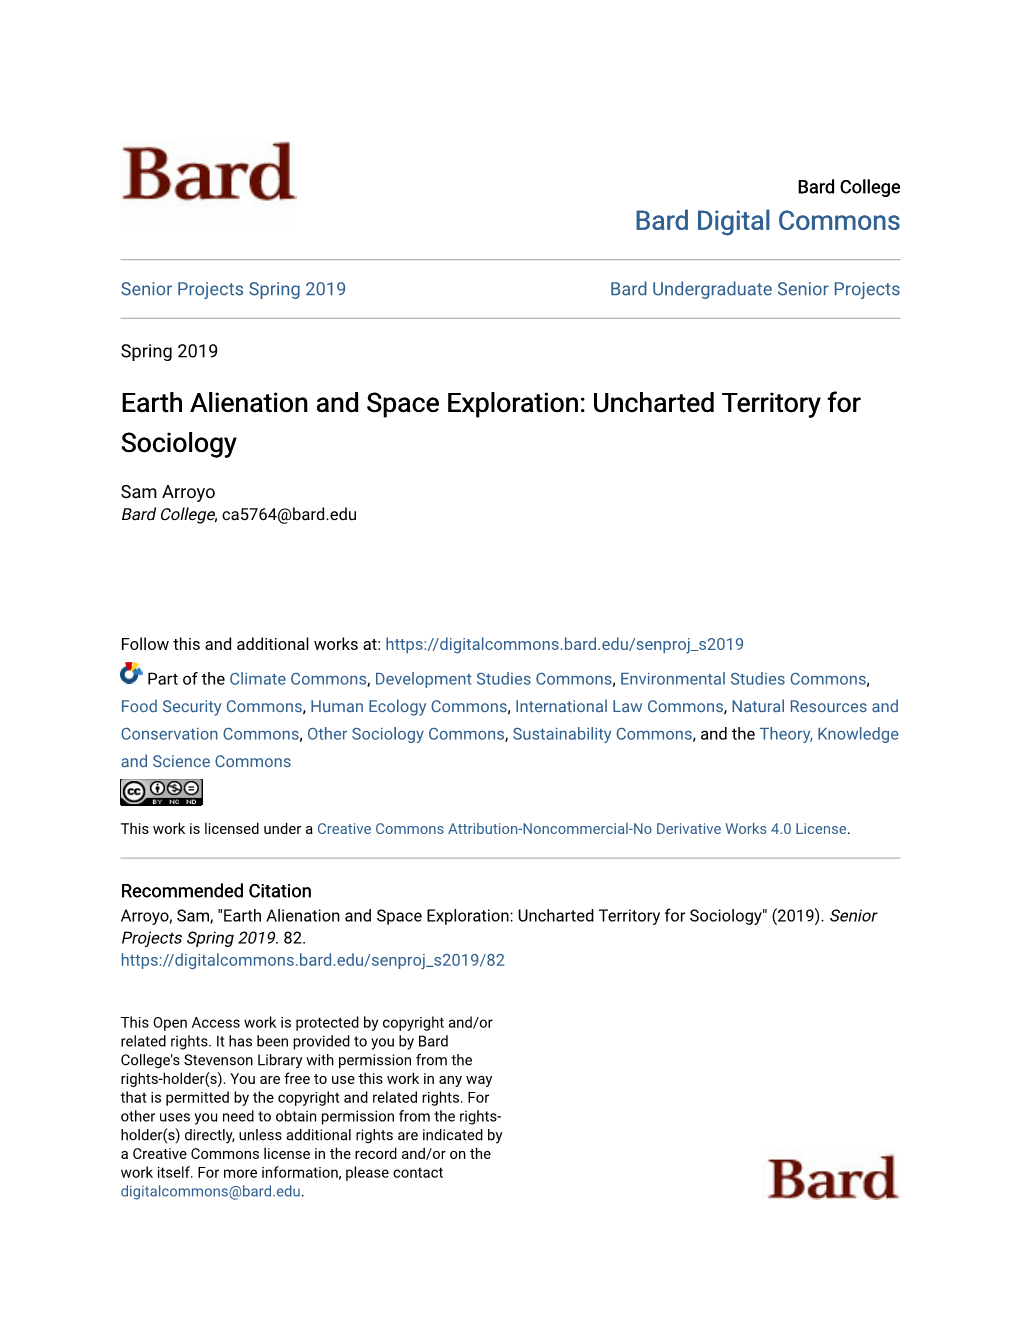 Earth Alienation and Space Exploration: Uncharted Territory for Sociology